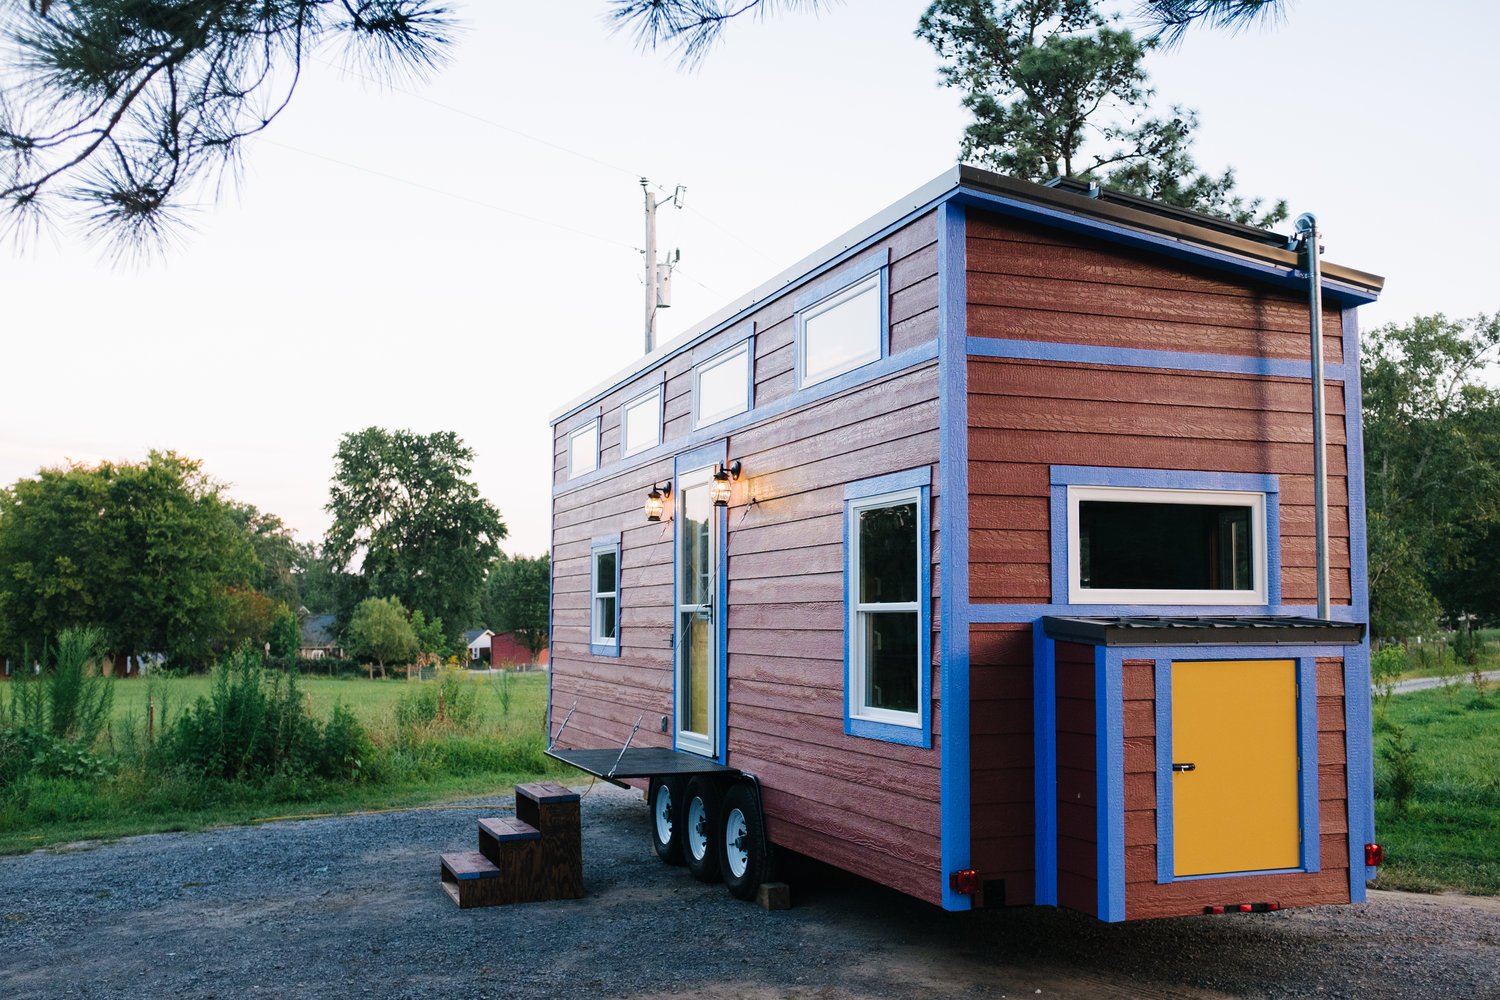 The-Big-Whimsy-30ft-Tiny-Home-by-Wind-River-Tiny-Homes-0055